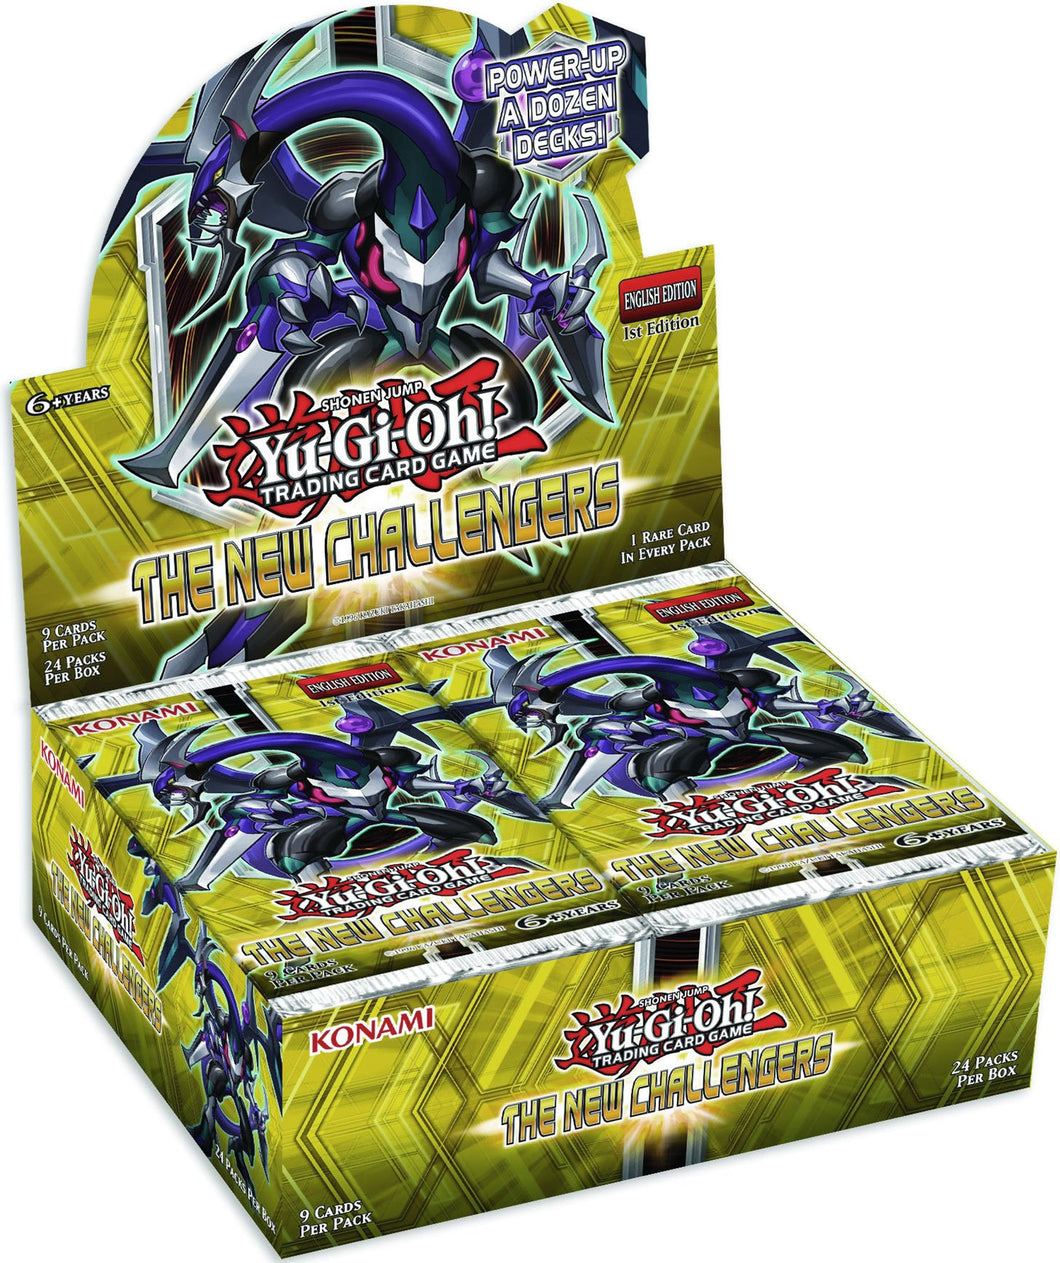 The New Challengers Booster Box (24 Packs)